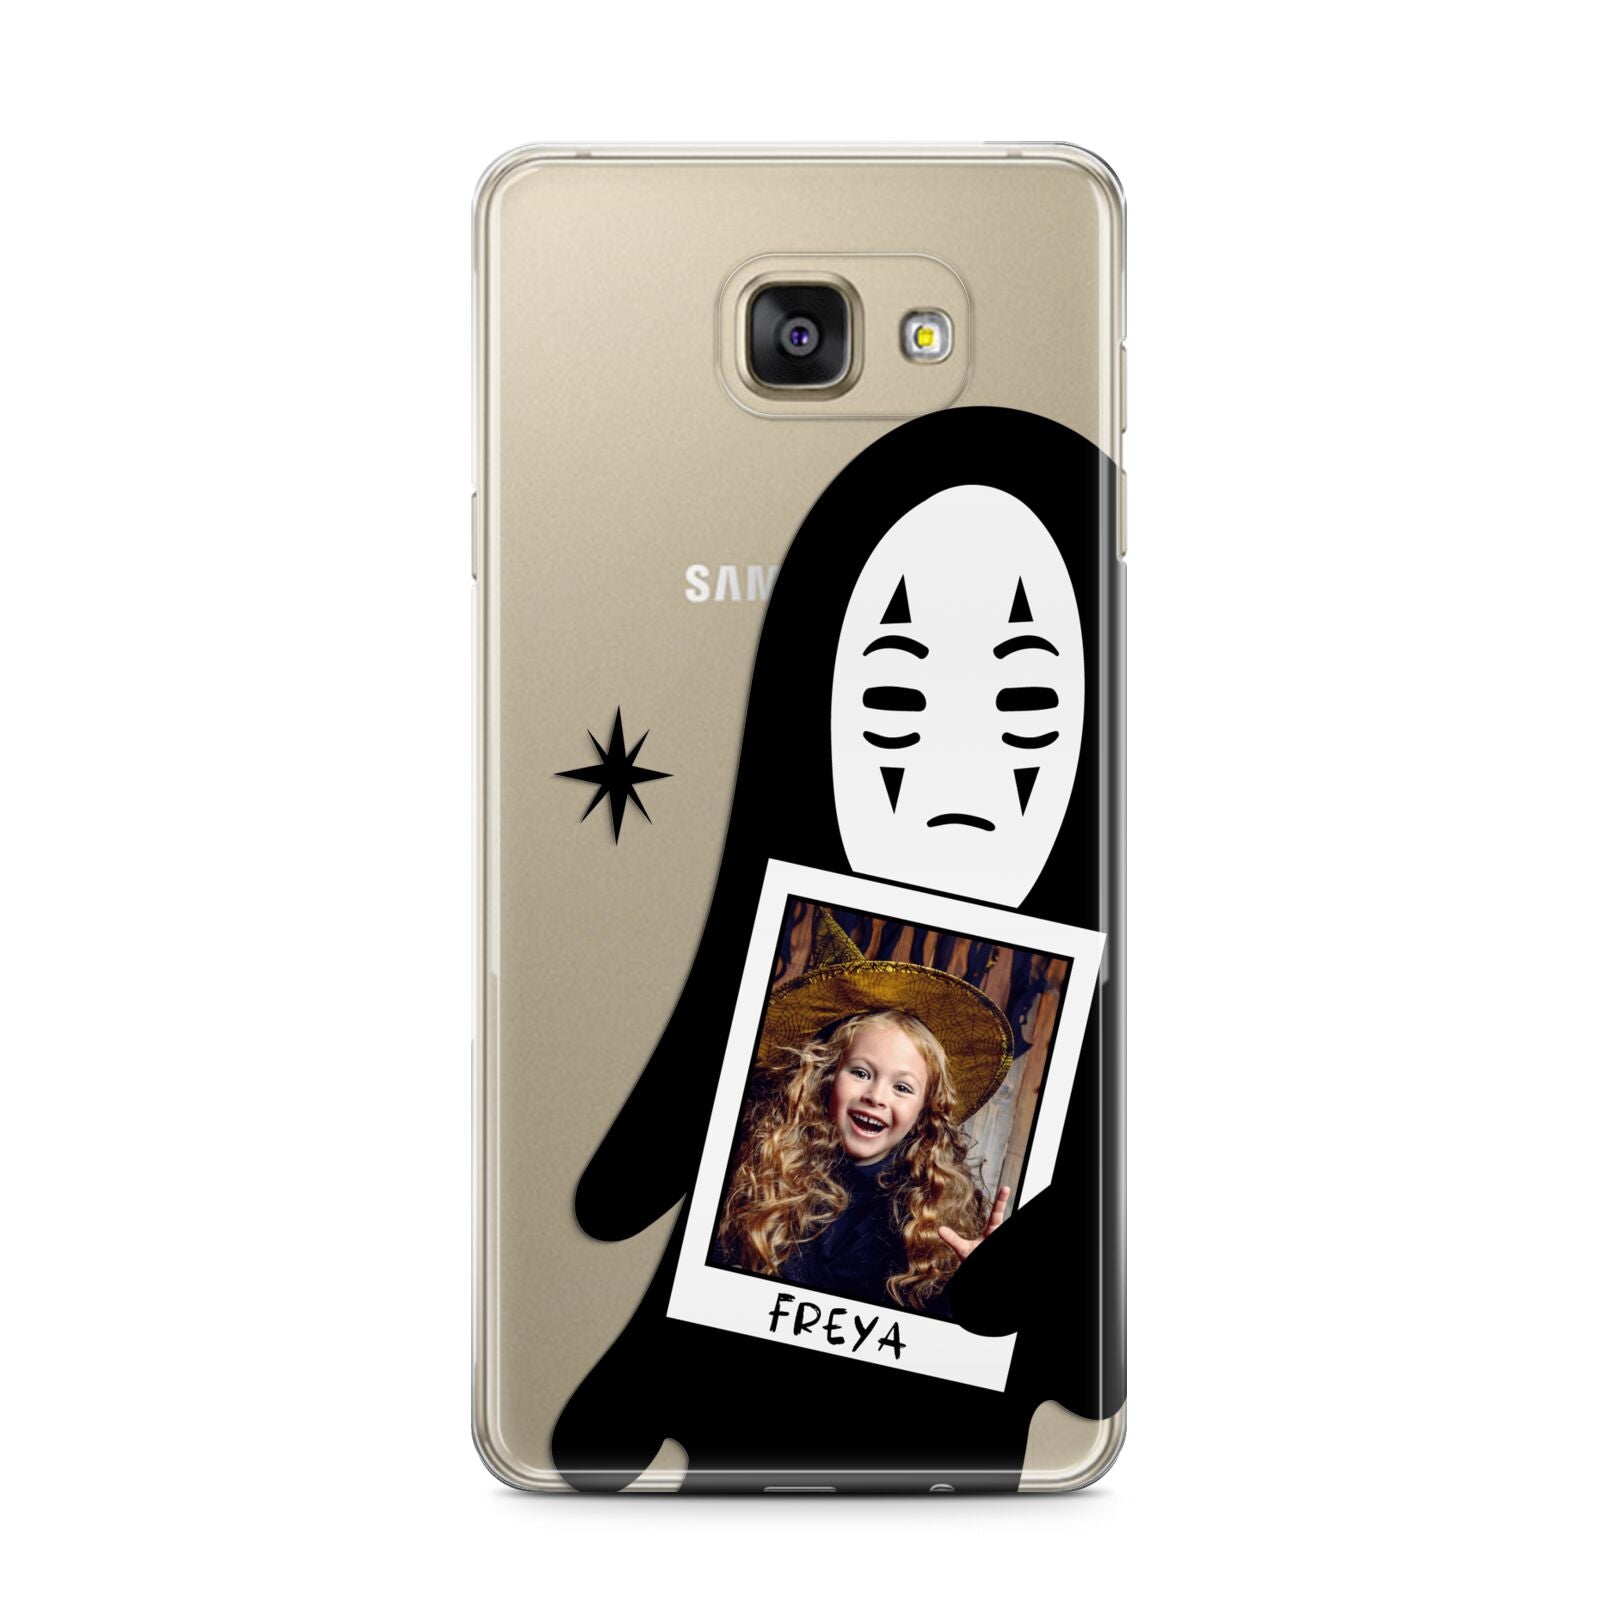 Ghostly Halloween Photo Samsung Galaxy A7 2016 Case on gold phone